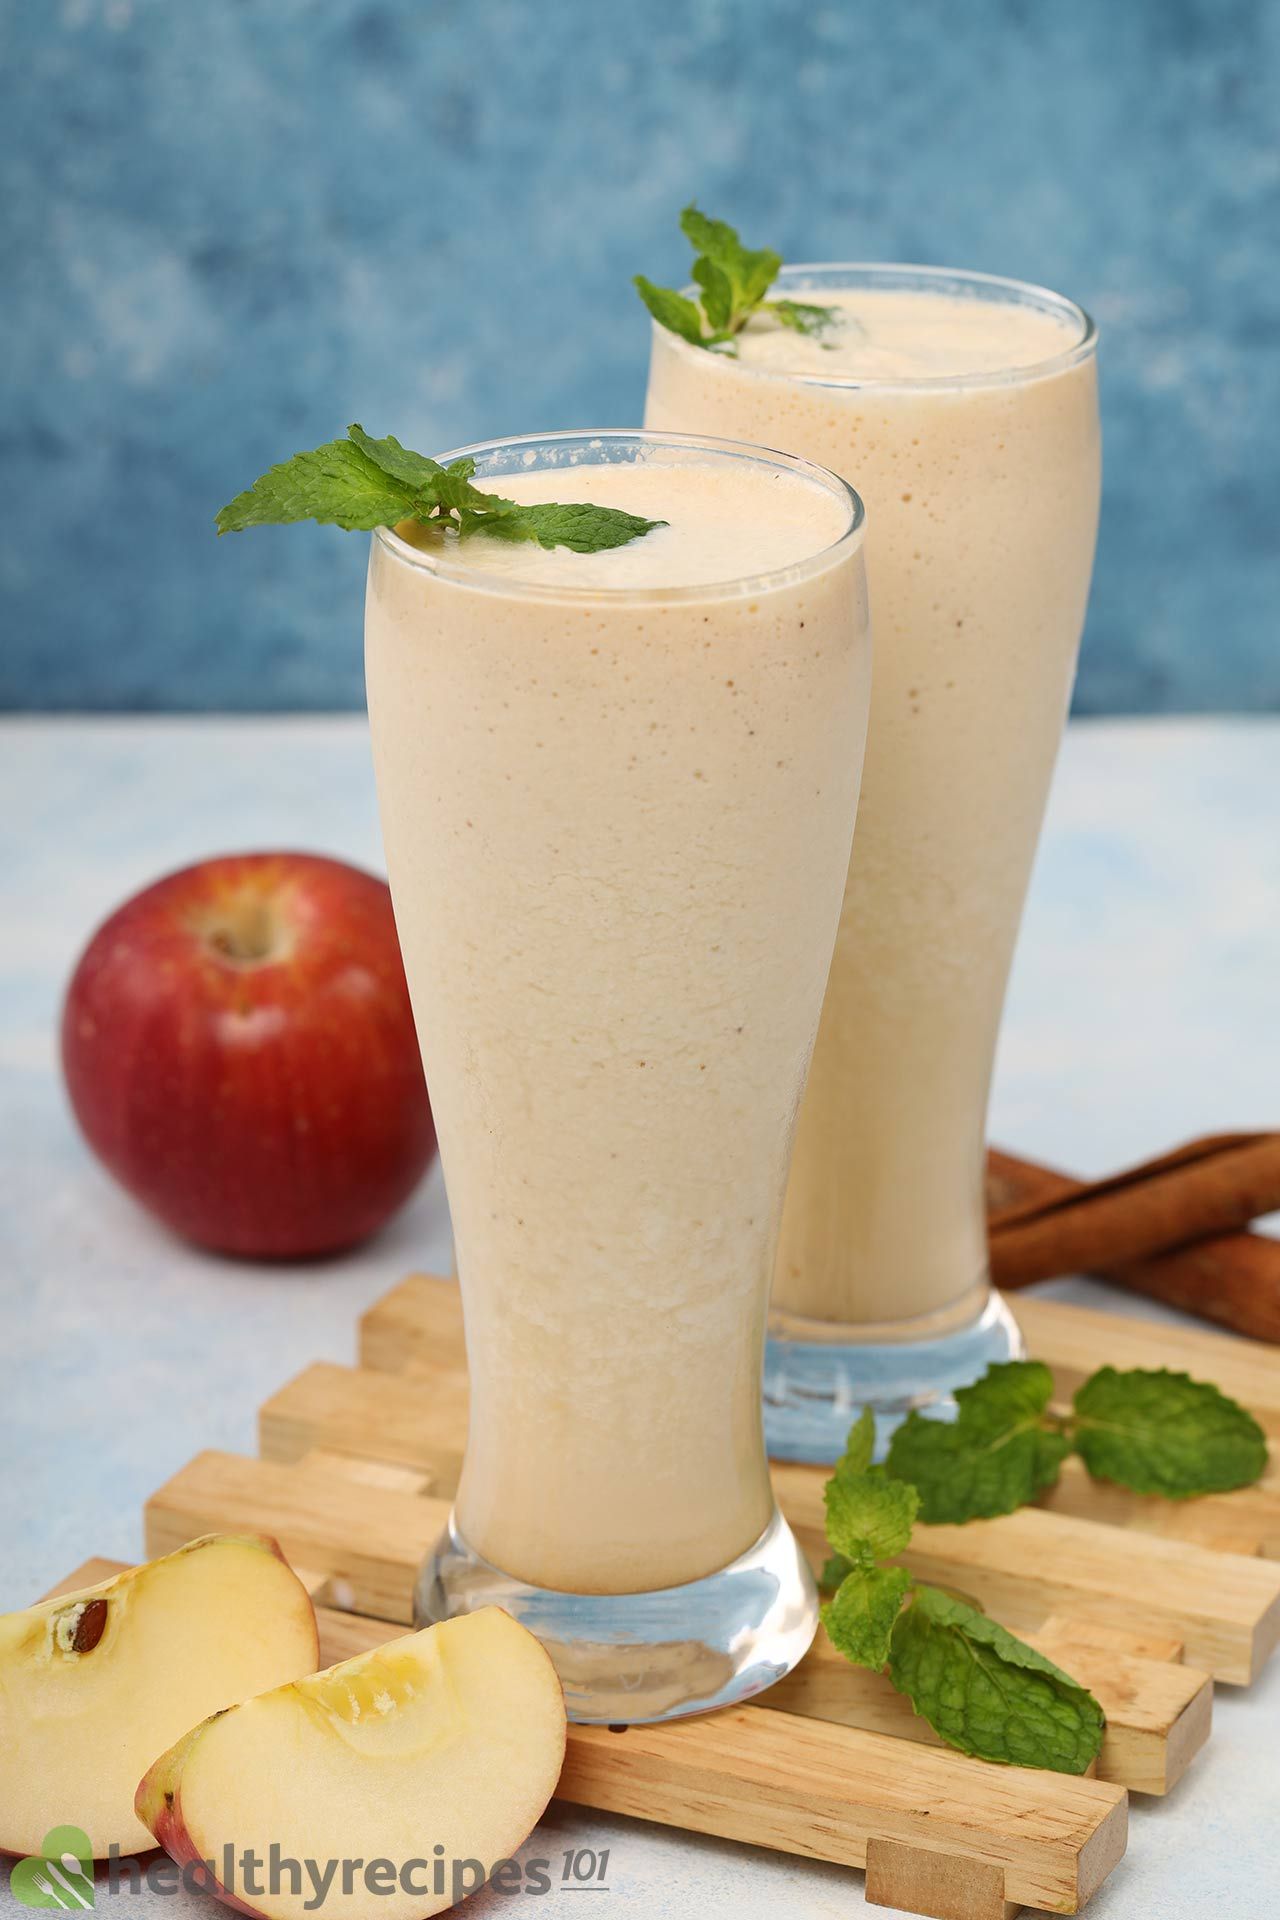 How Long Does Apple Smoothie Last